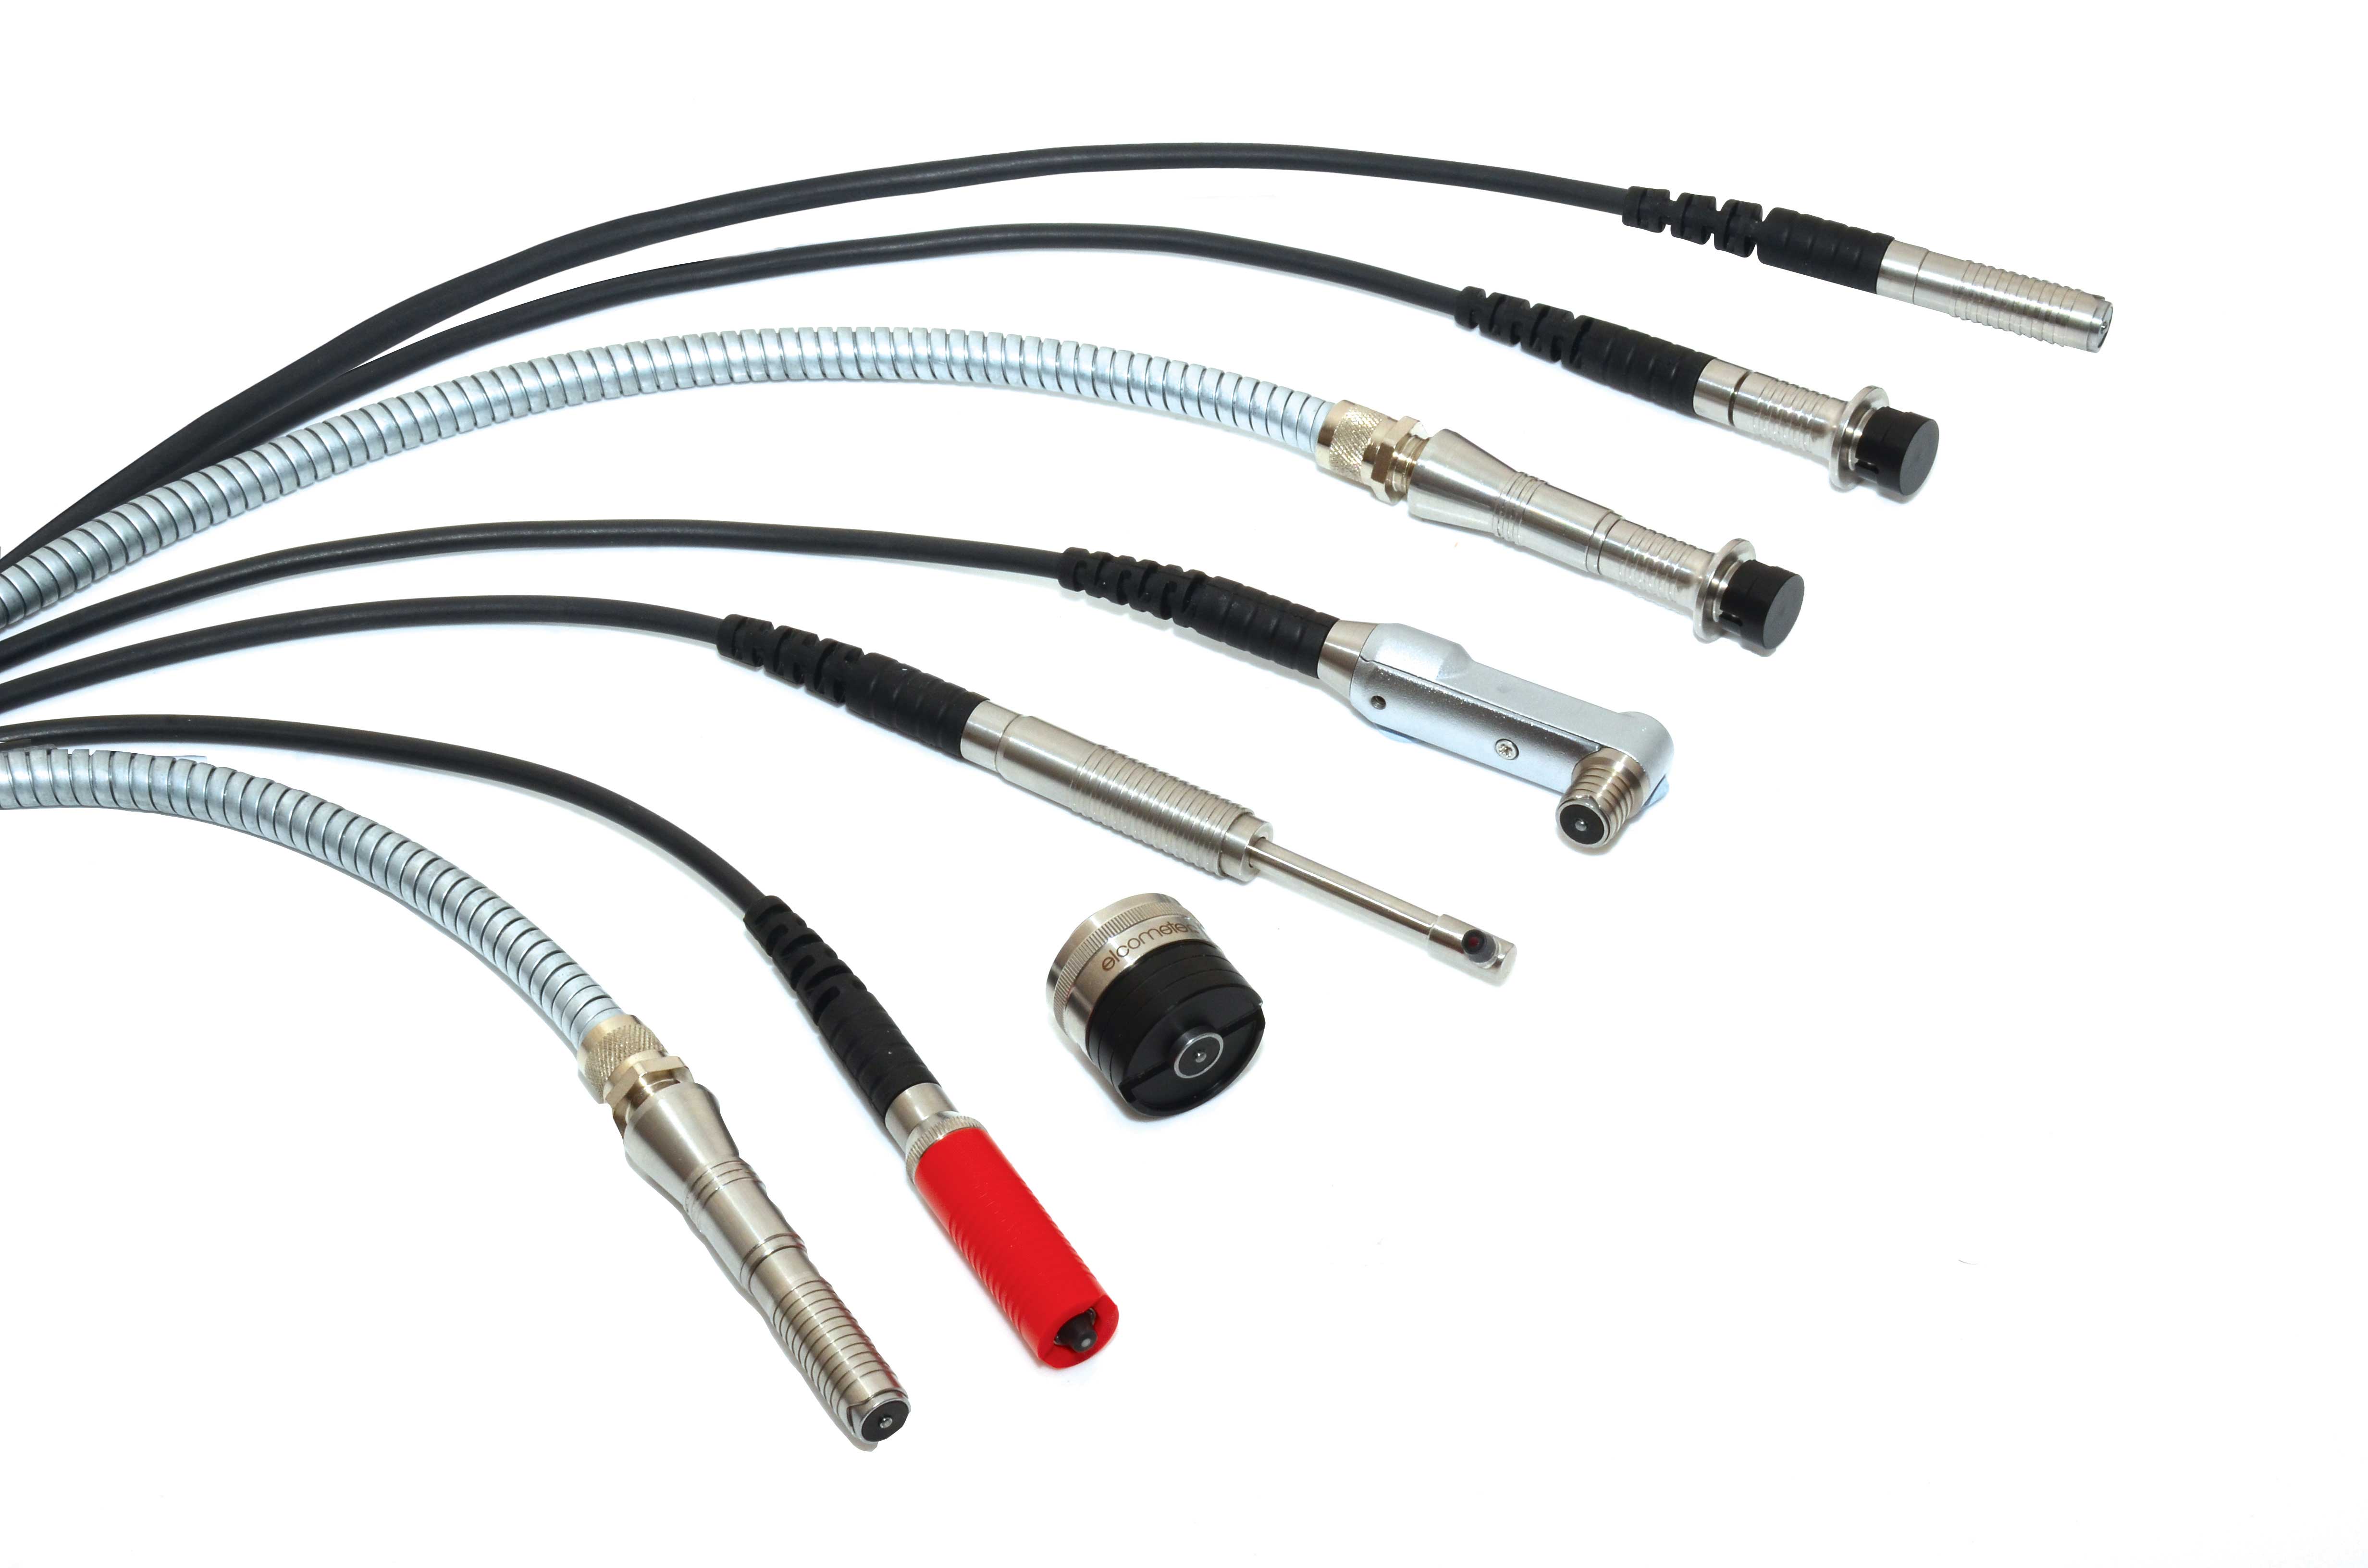 A range of probes that come with the Elcometer 456 Coating Thickness Gauge